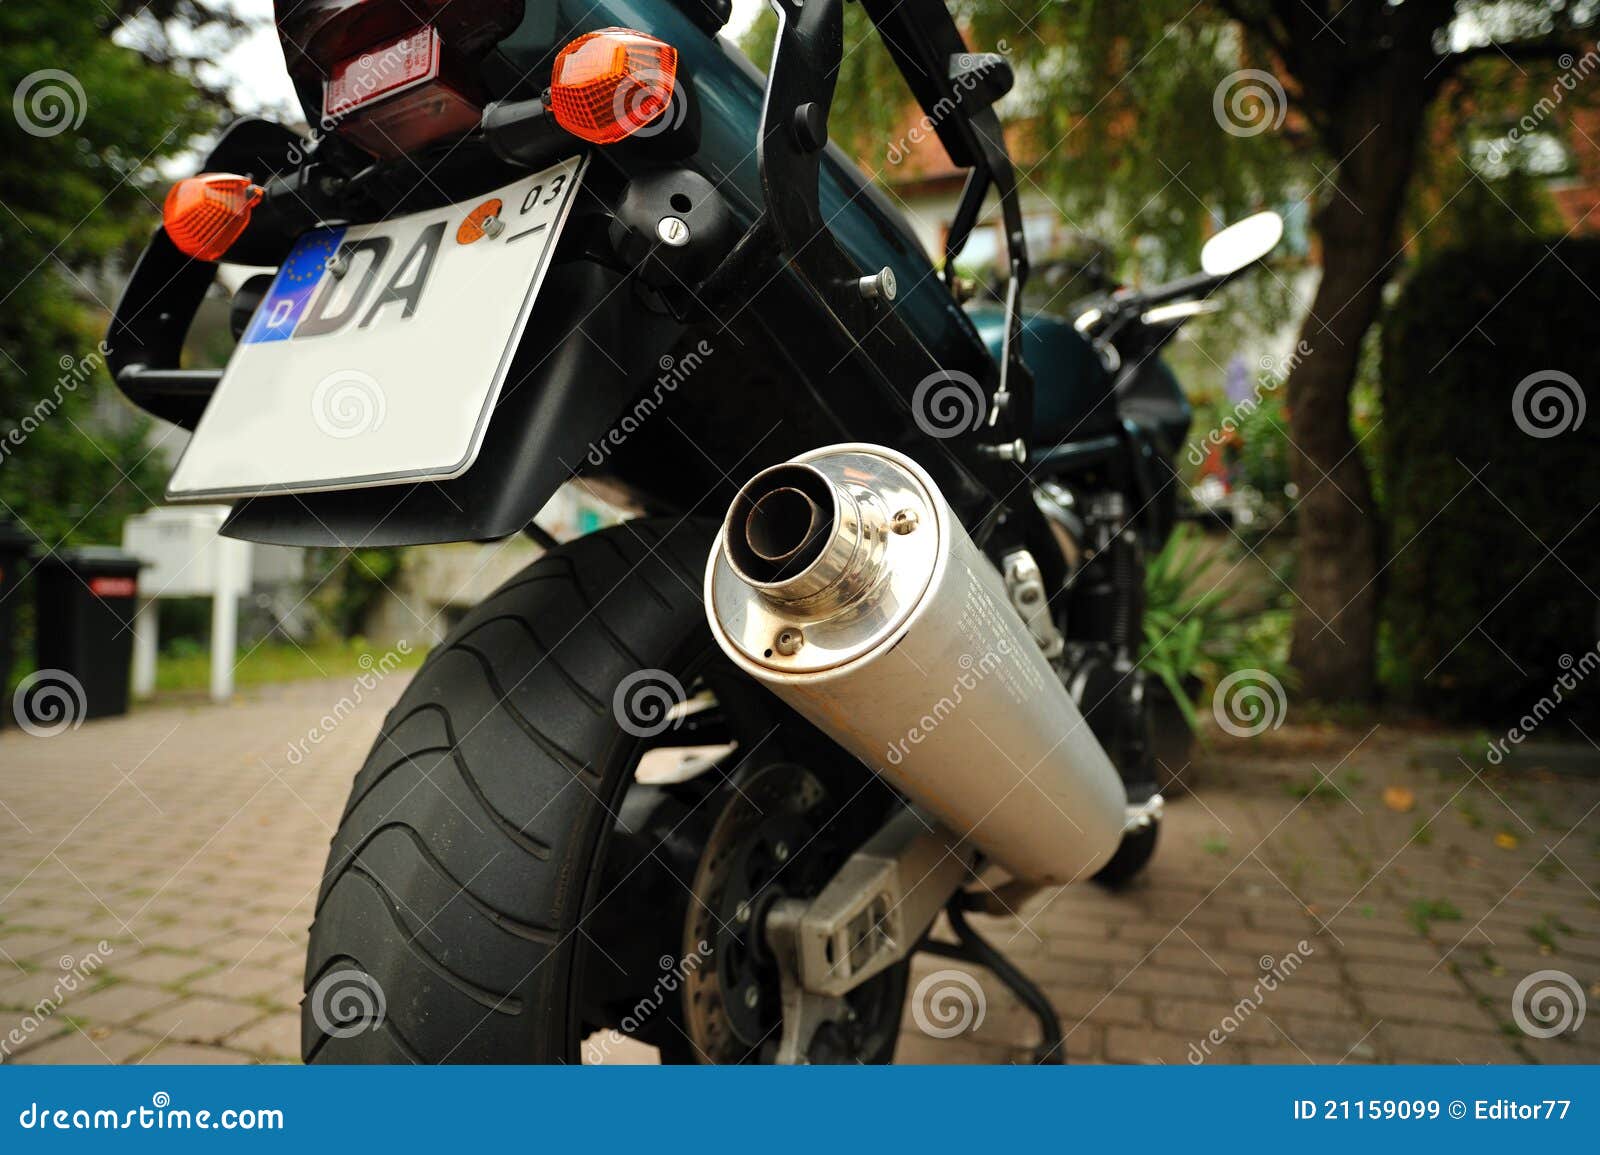 Sport motorcycle details stock image. Image of chromatic - 21159099